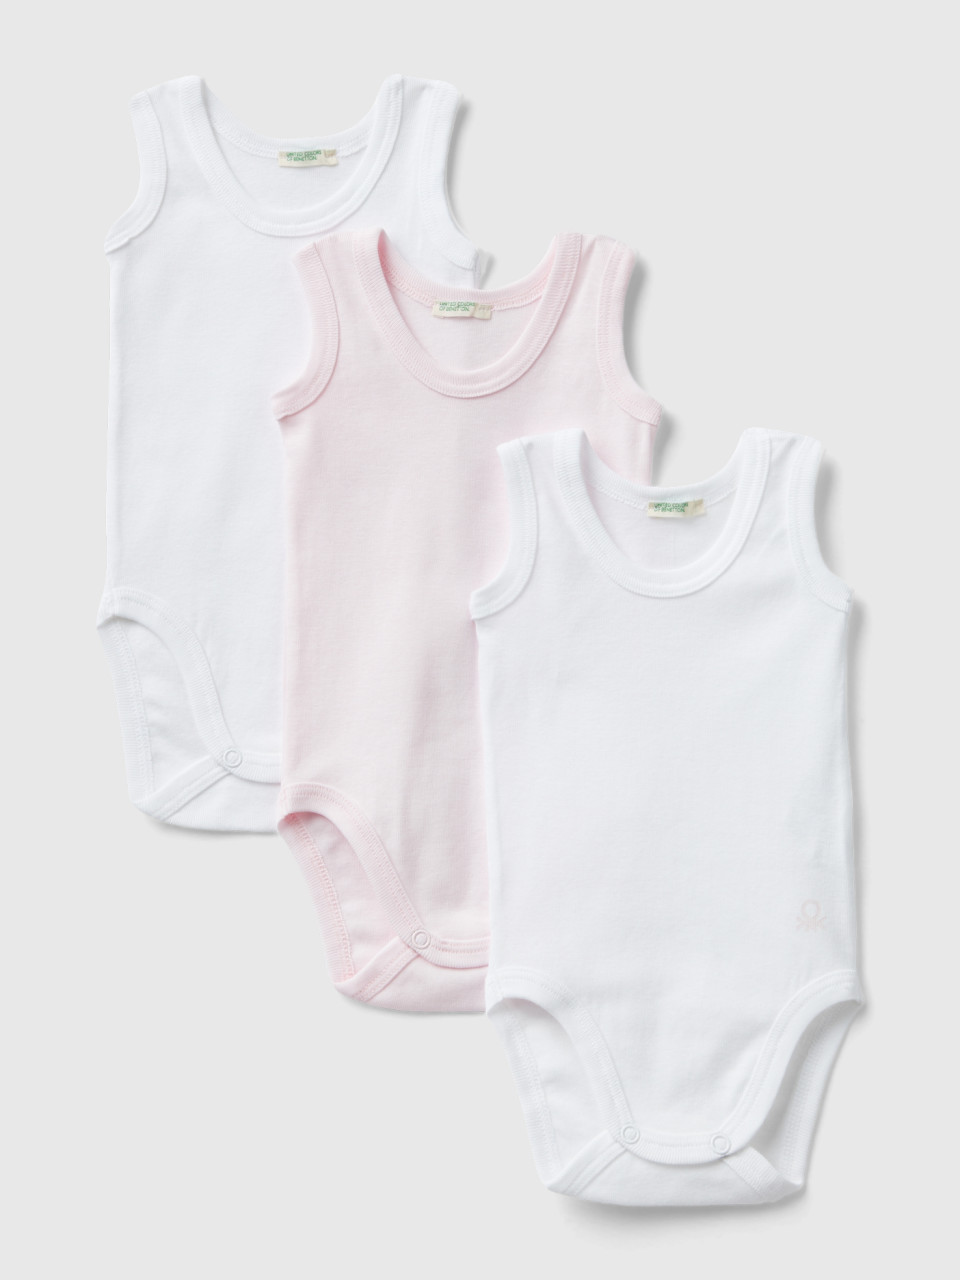 Benetton, Three Solid Colored Tank Top Bodysuits, Multi-color, Kids